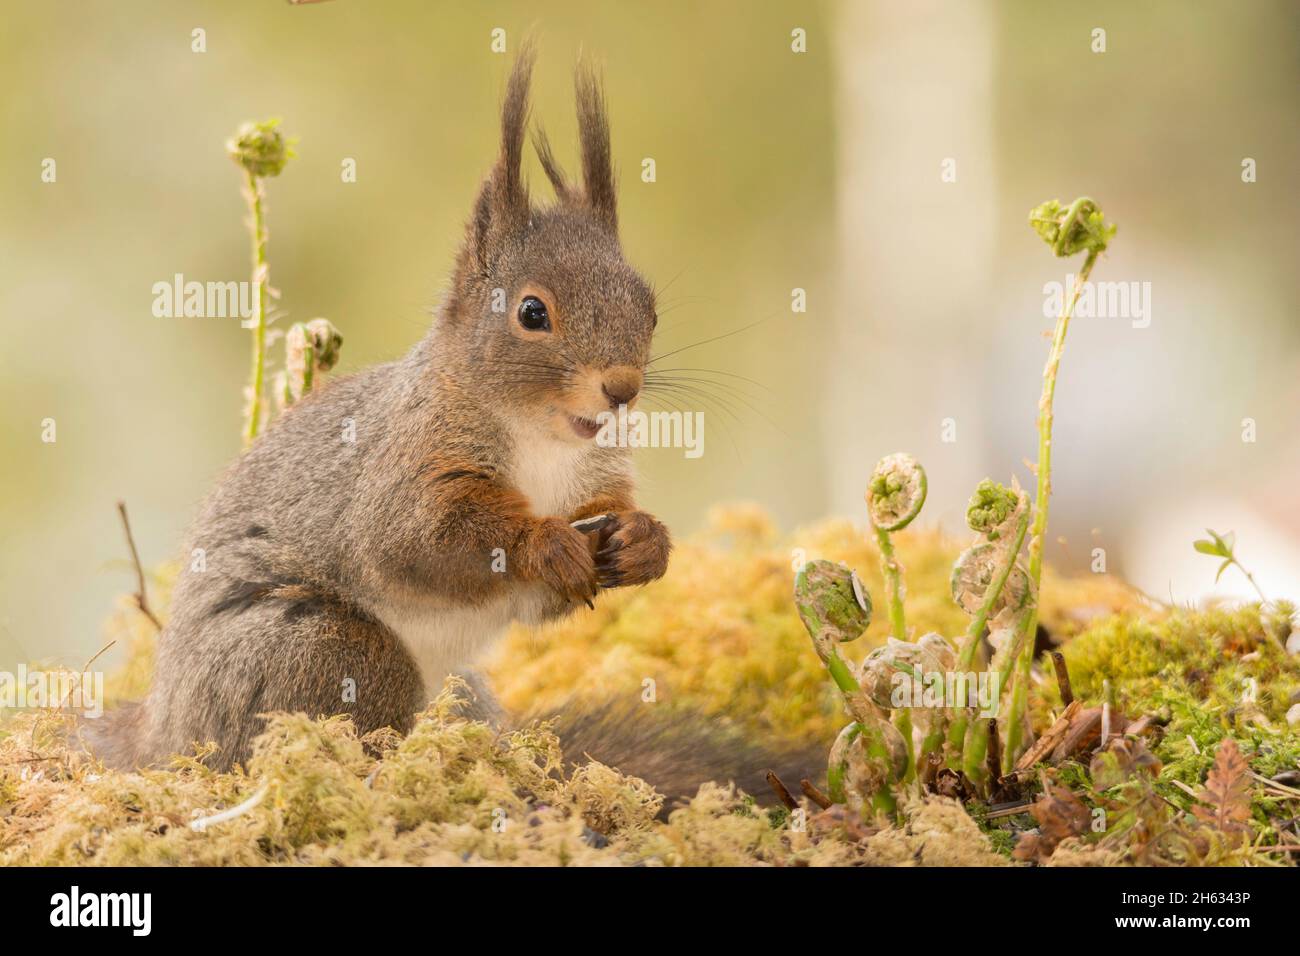 close up of red squirrel looking to the side with a happy face Stock Photo